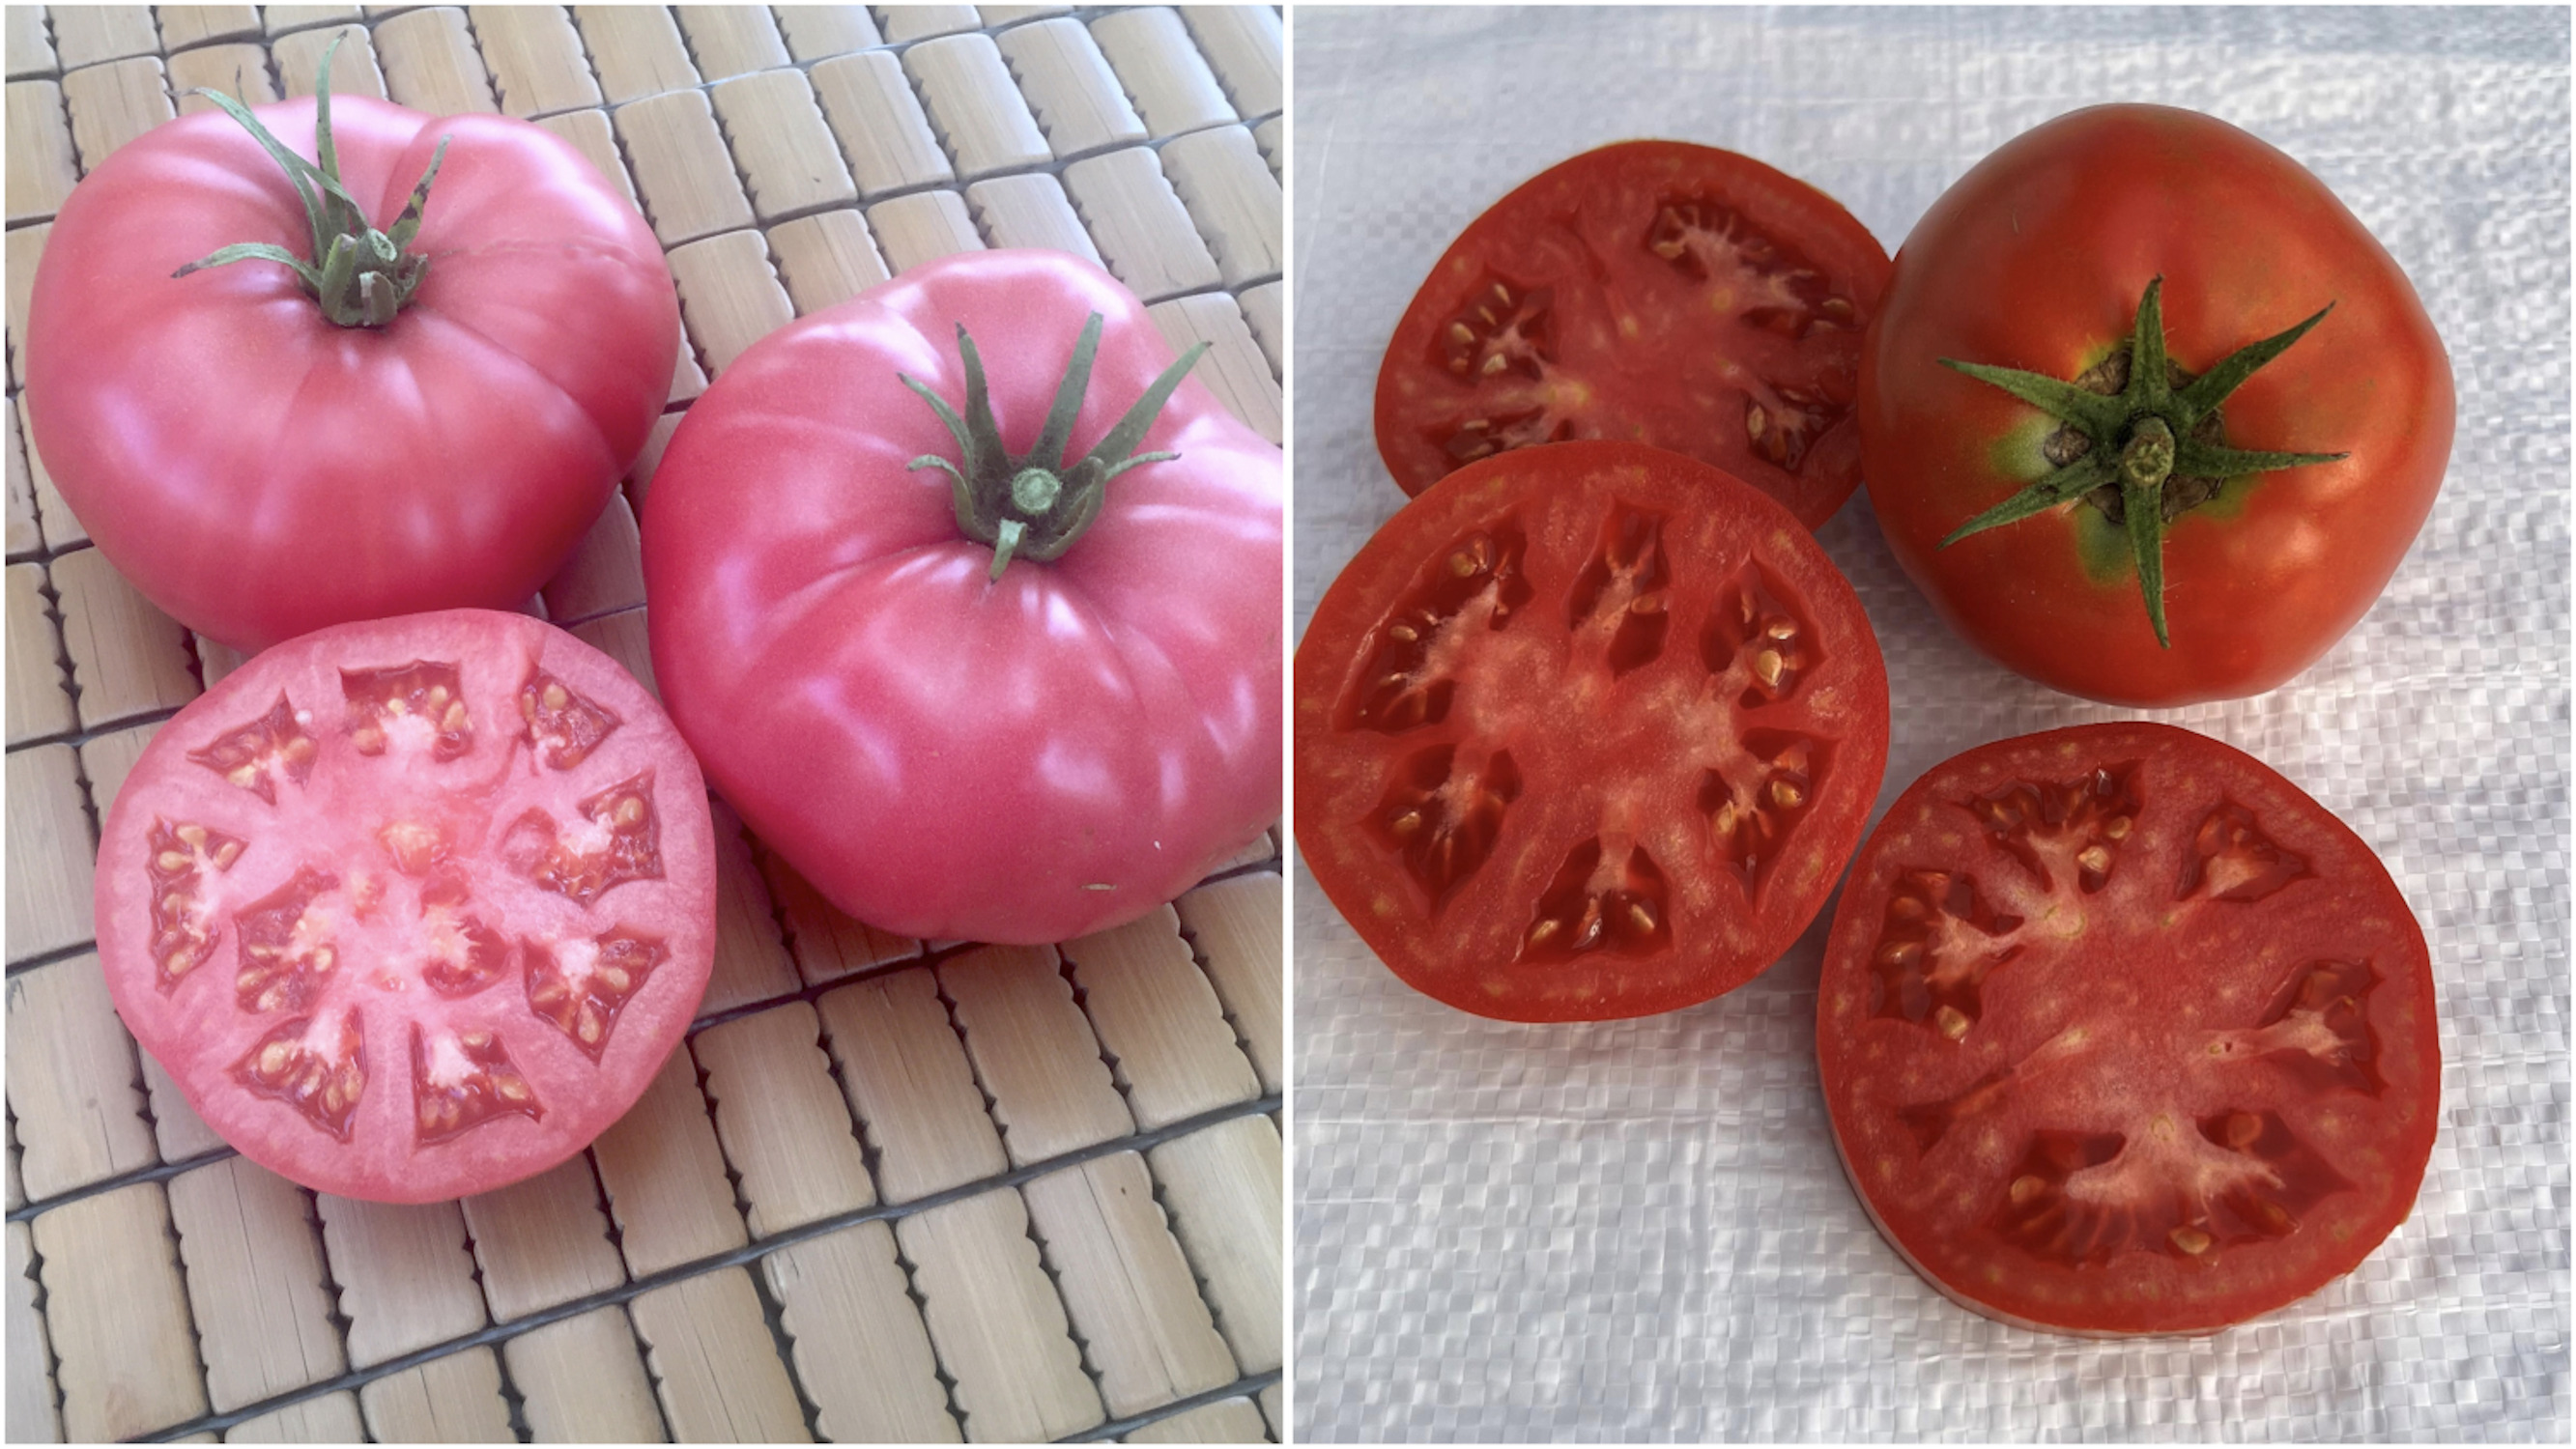 Tomato Patio Beefsteaks 4 pc. - R89786